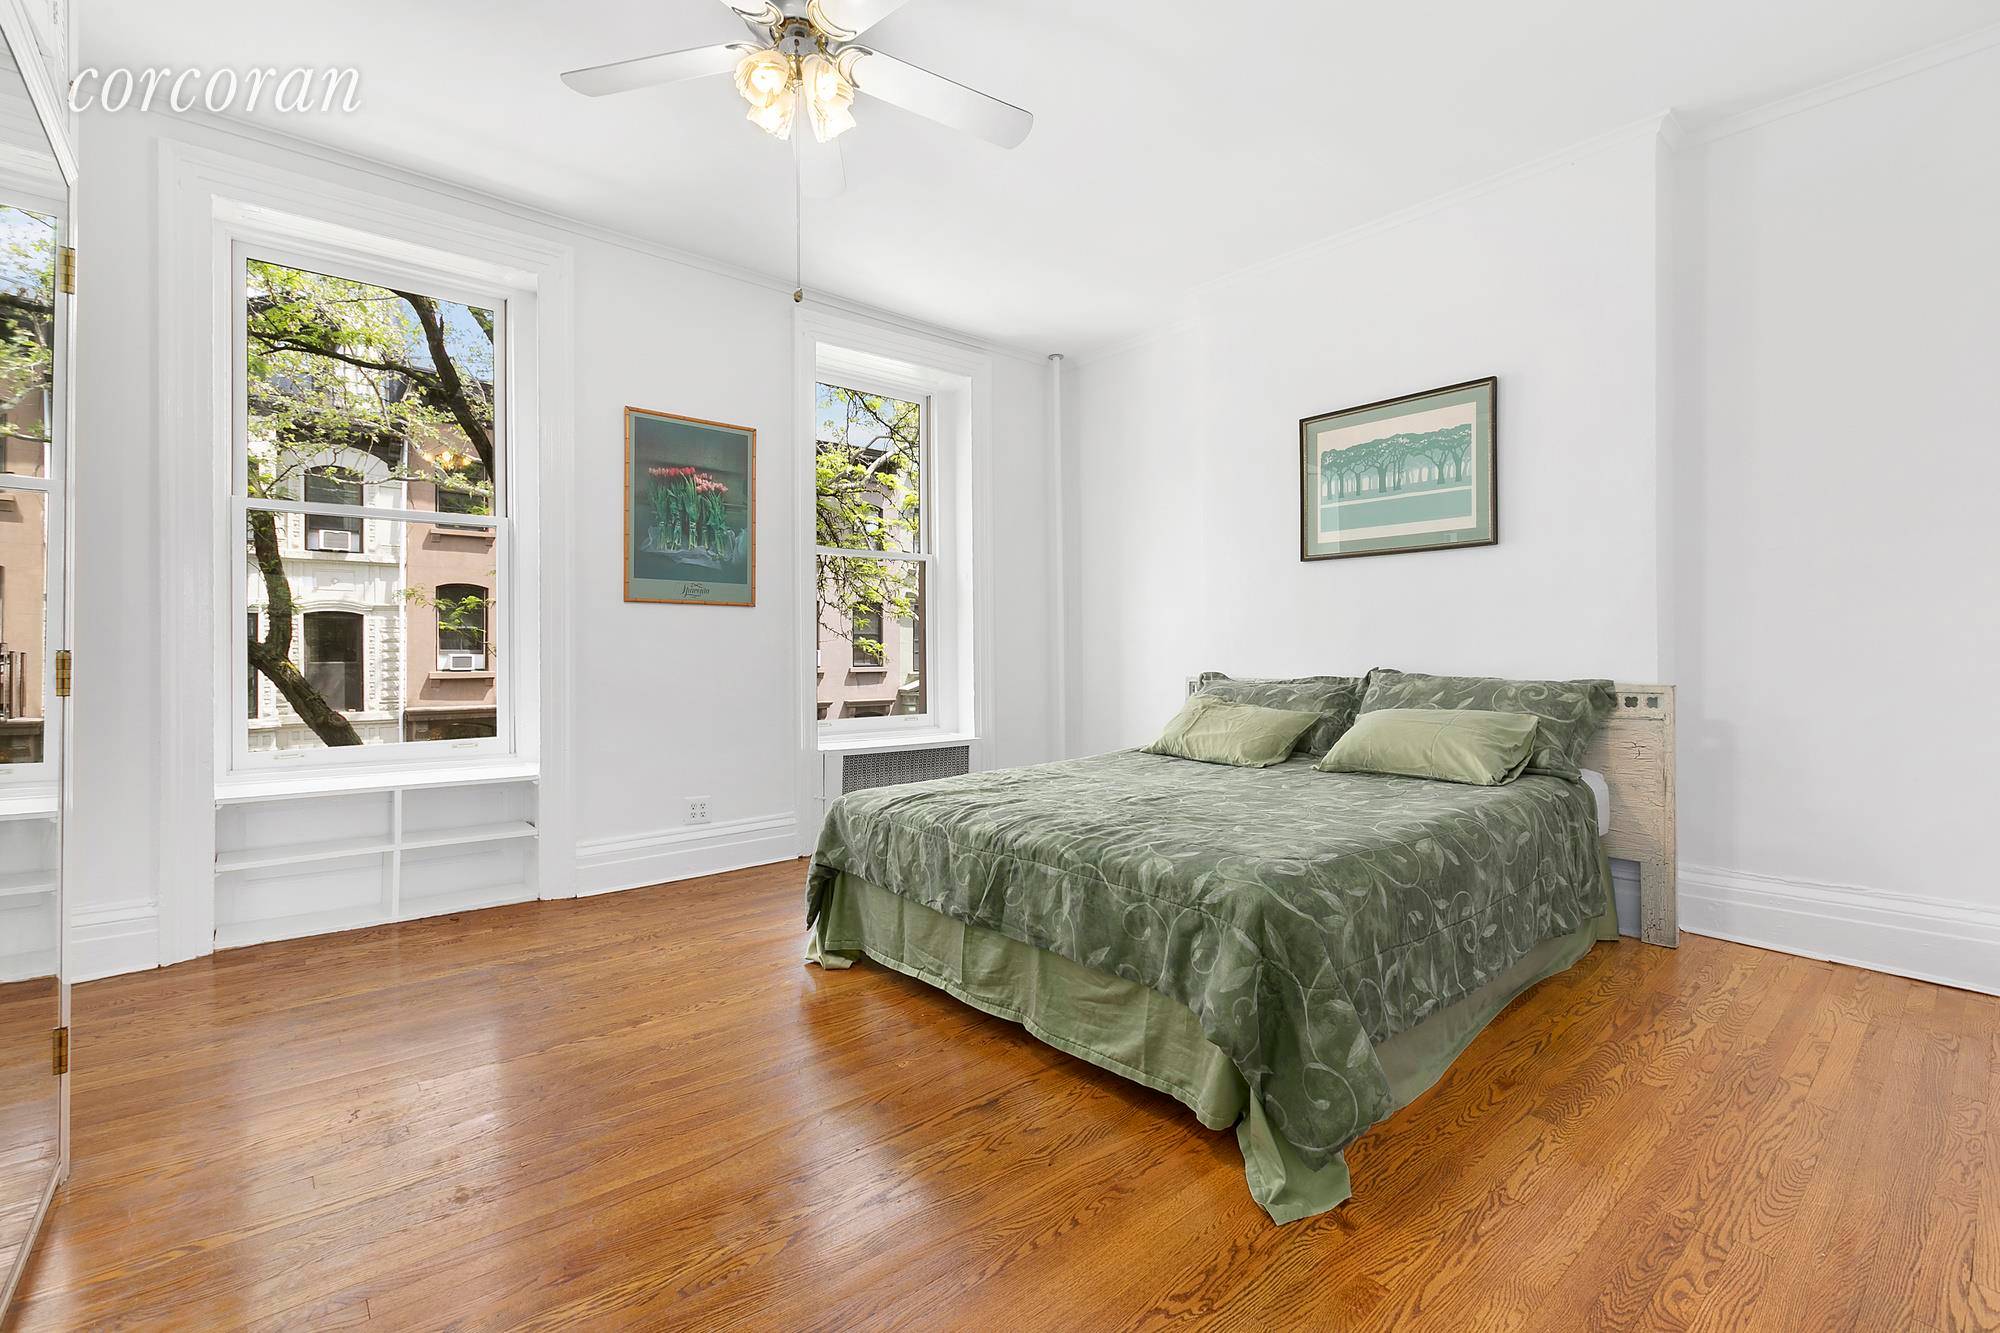 LOVE WHERE YOU LIVE One full floor 2BR, 1BA at 164 State Street in Brooklyn Heights 999, 000, Maint.